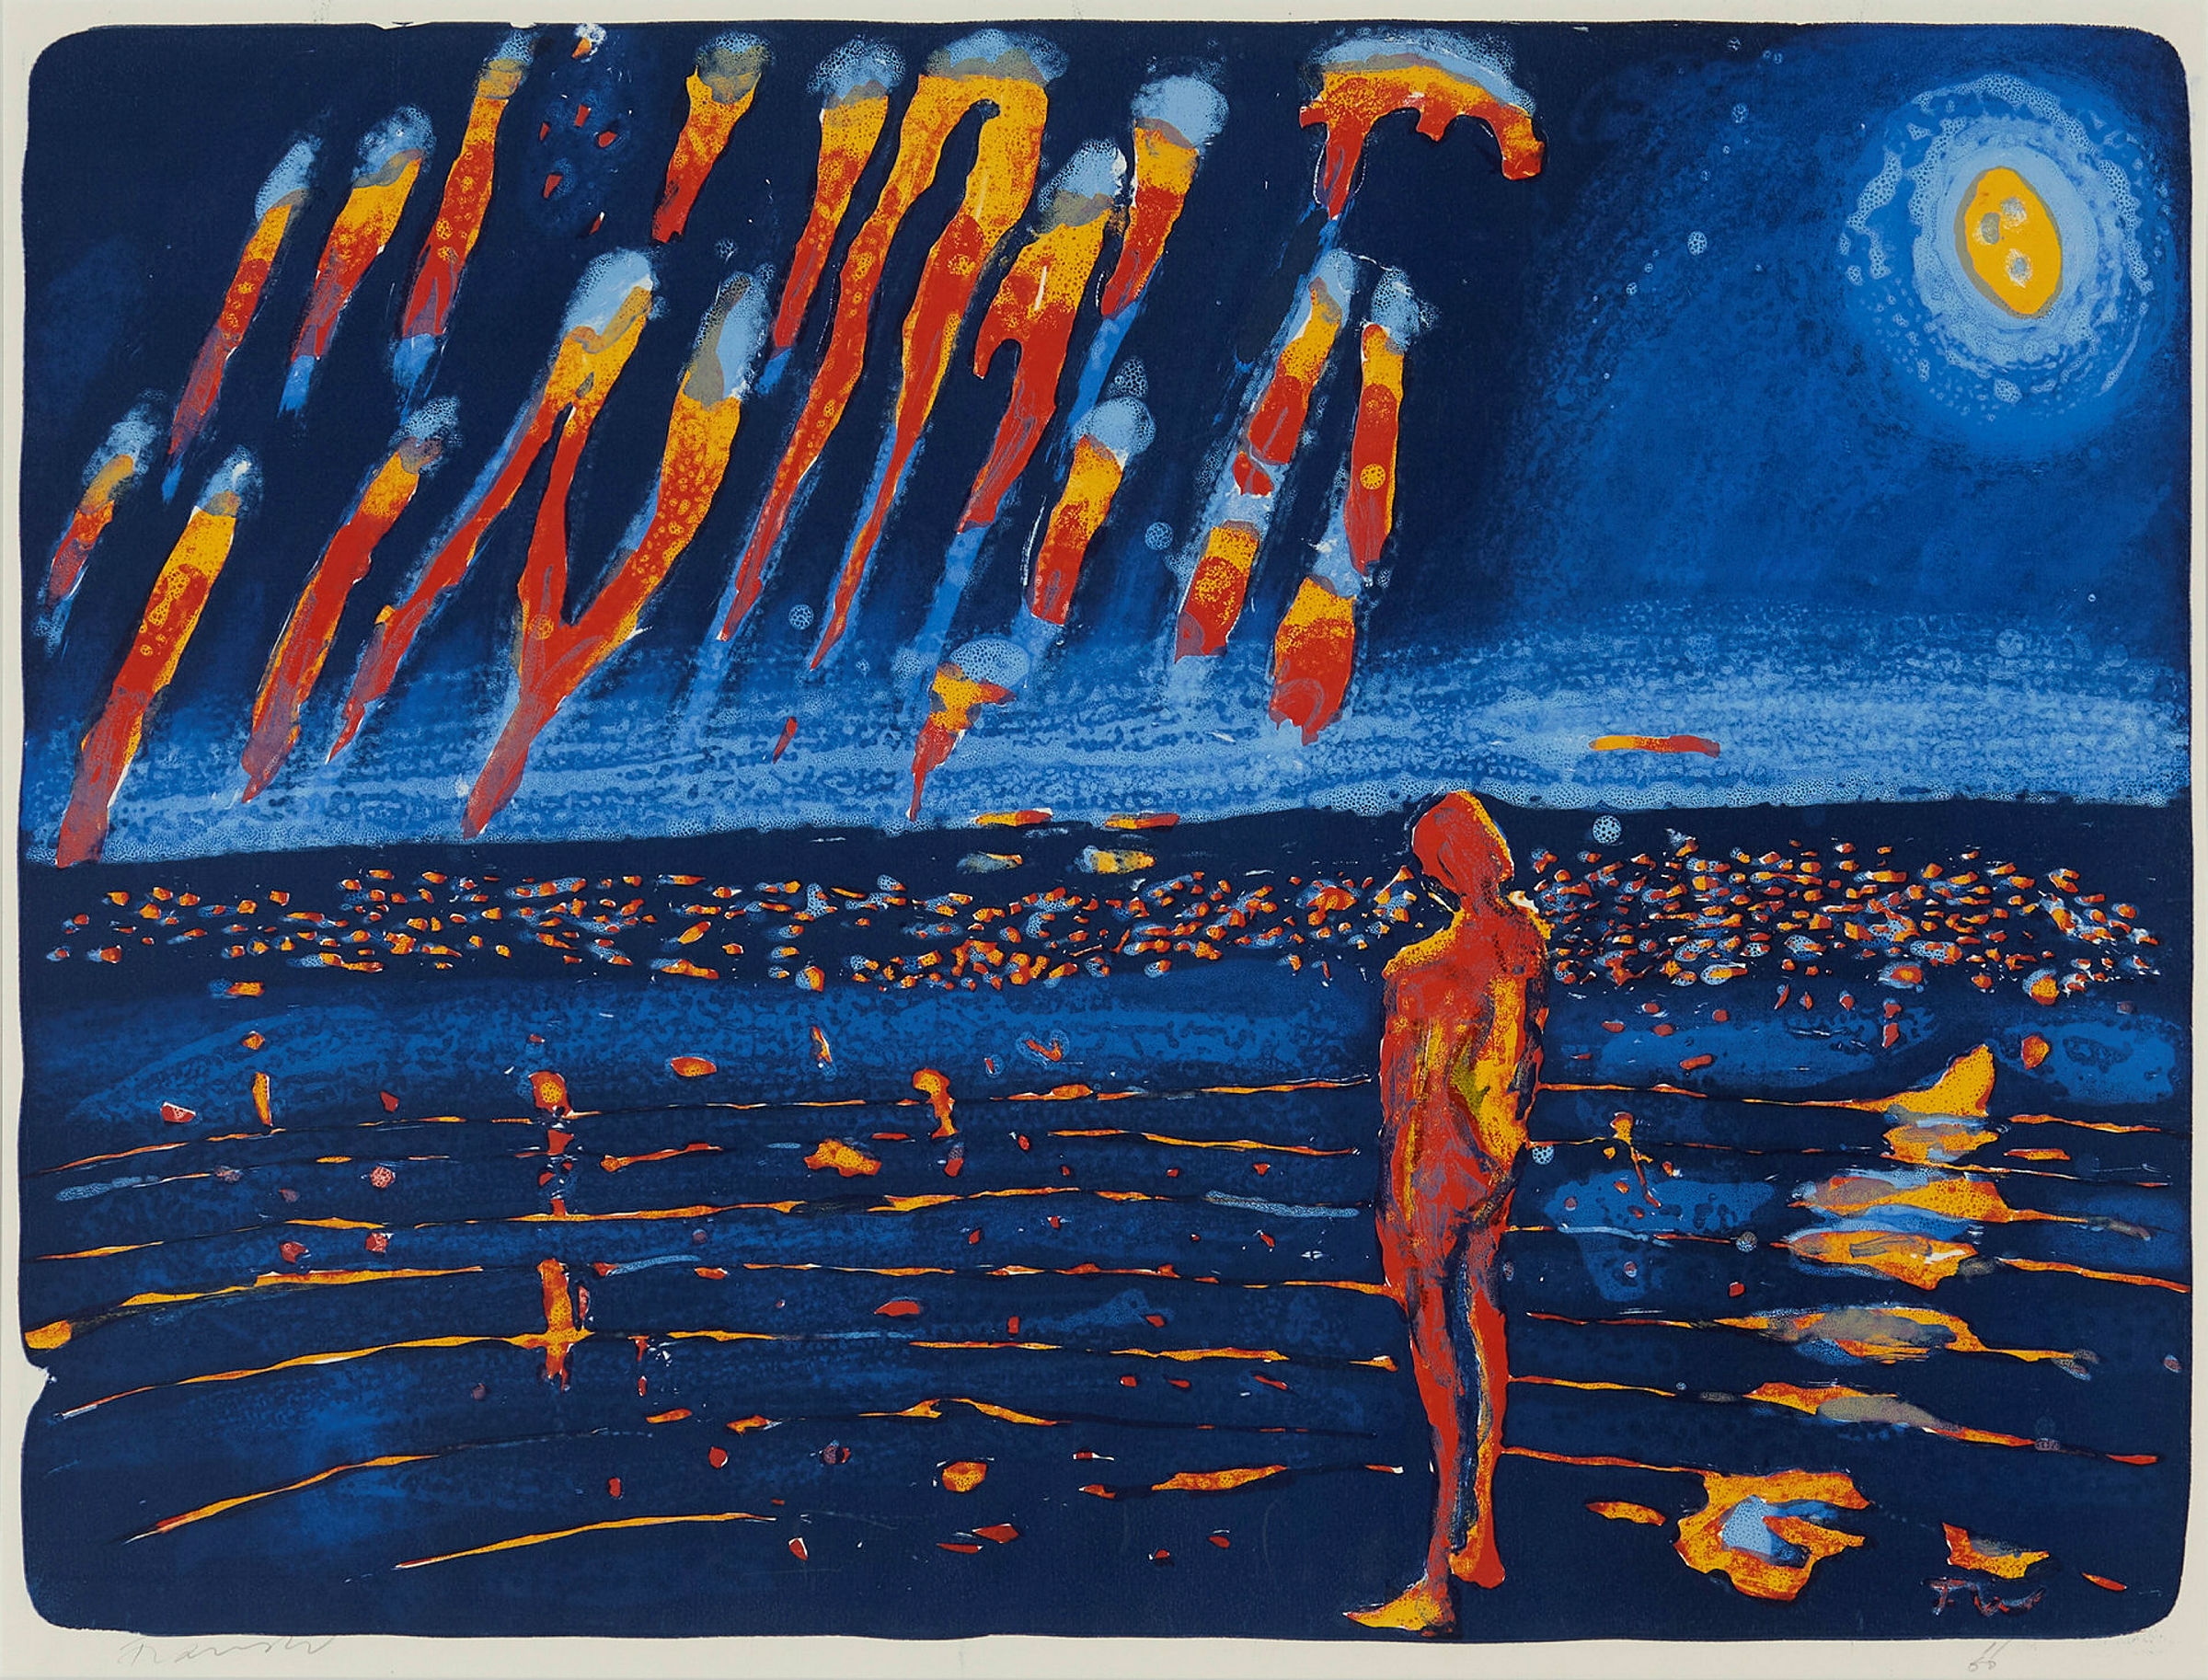 Nordlys by Frans Widerberg, 1982